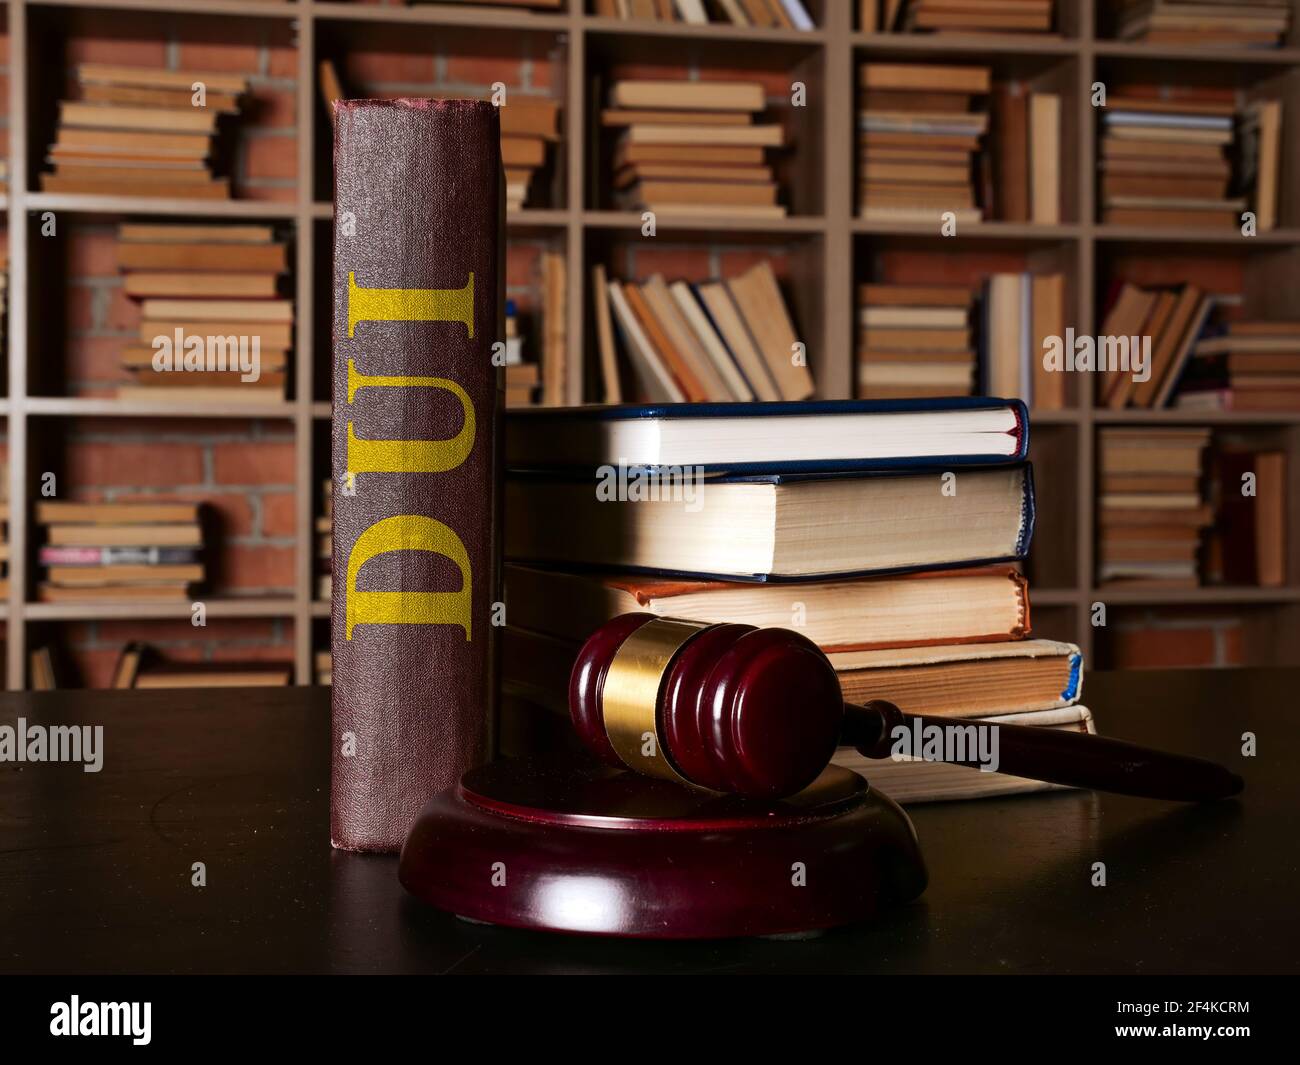 DUI law or driving under the influence book stands next to the gavel. Stock Photo